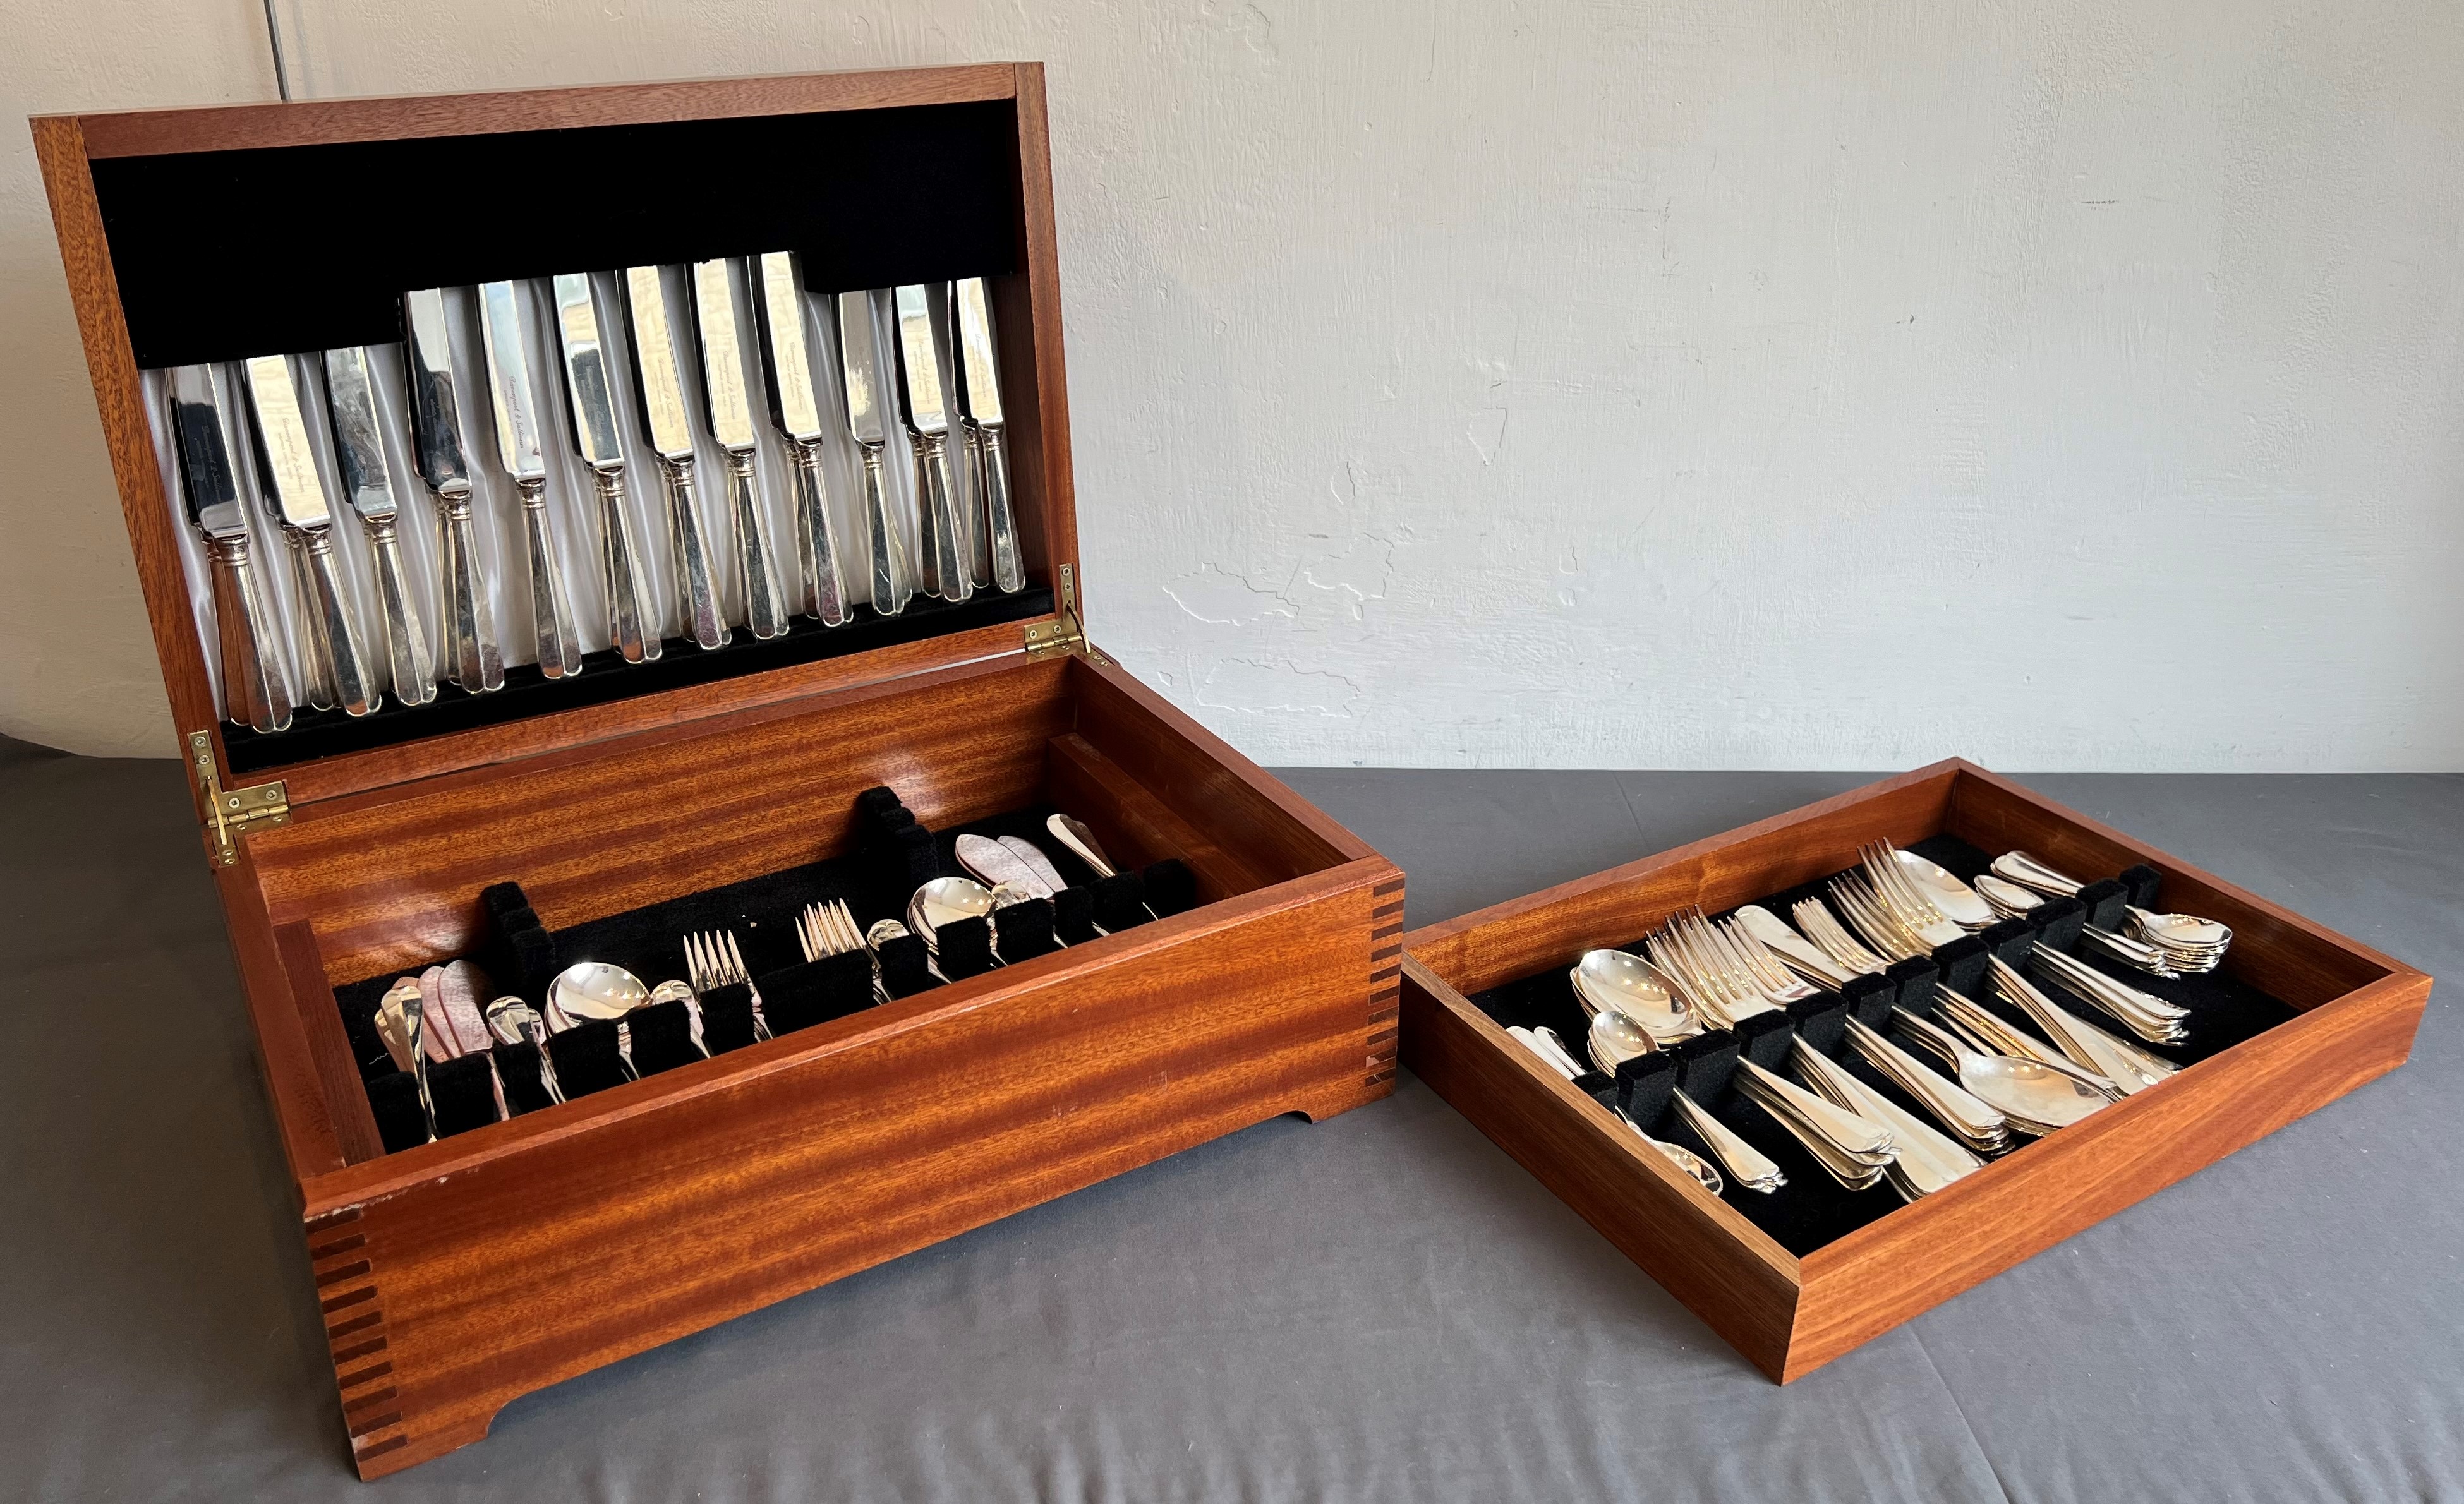 A canteen of silver plated A1 cutlery by Davenport & Sullivan of Sheffield - the twelve person